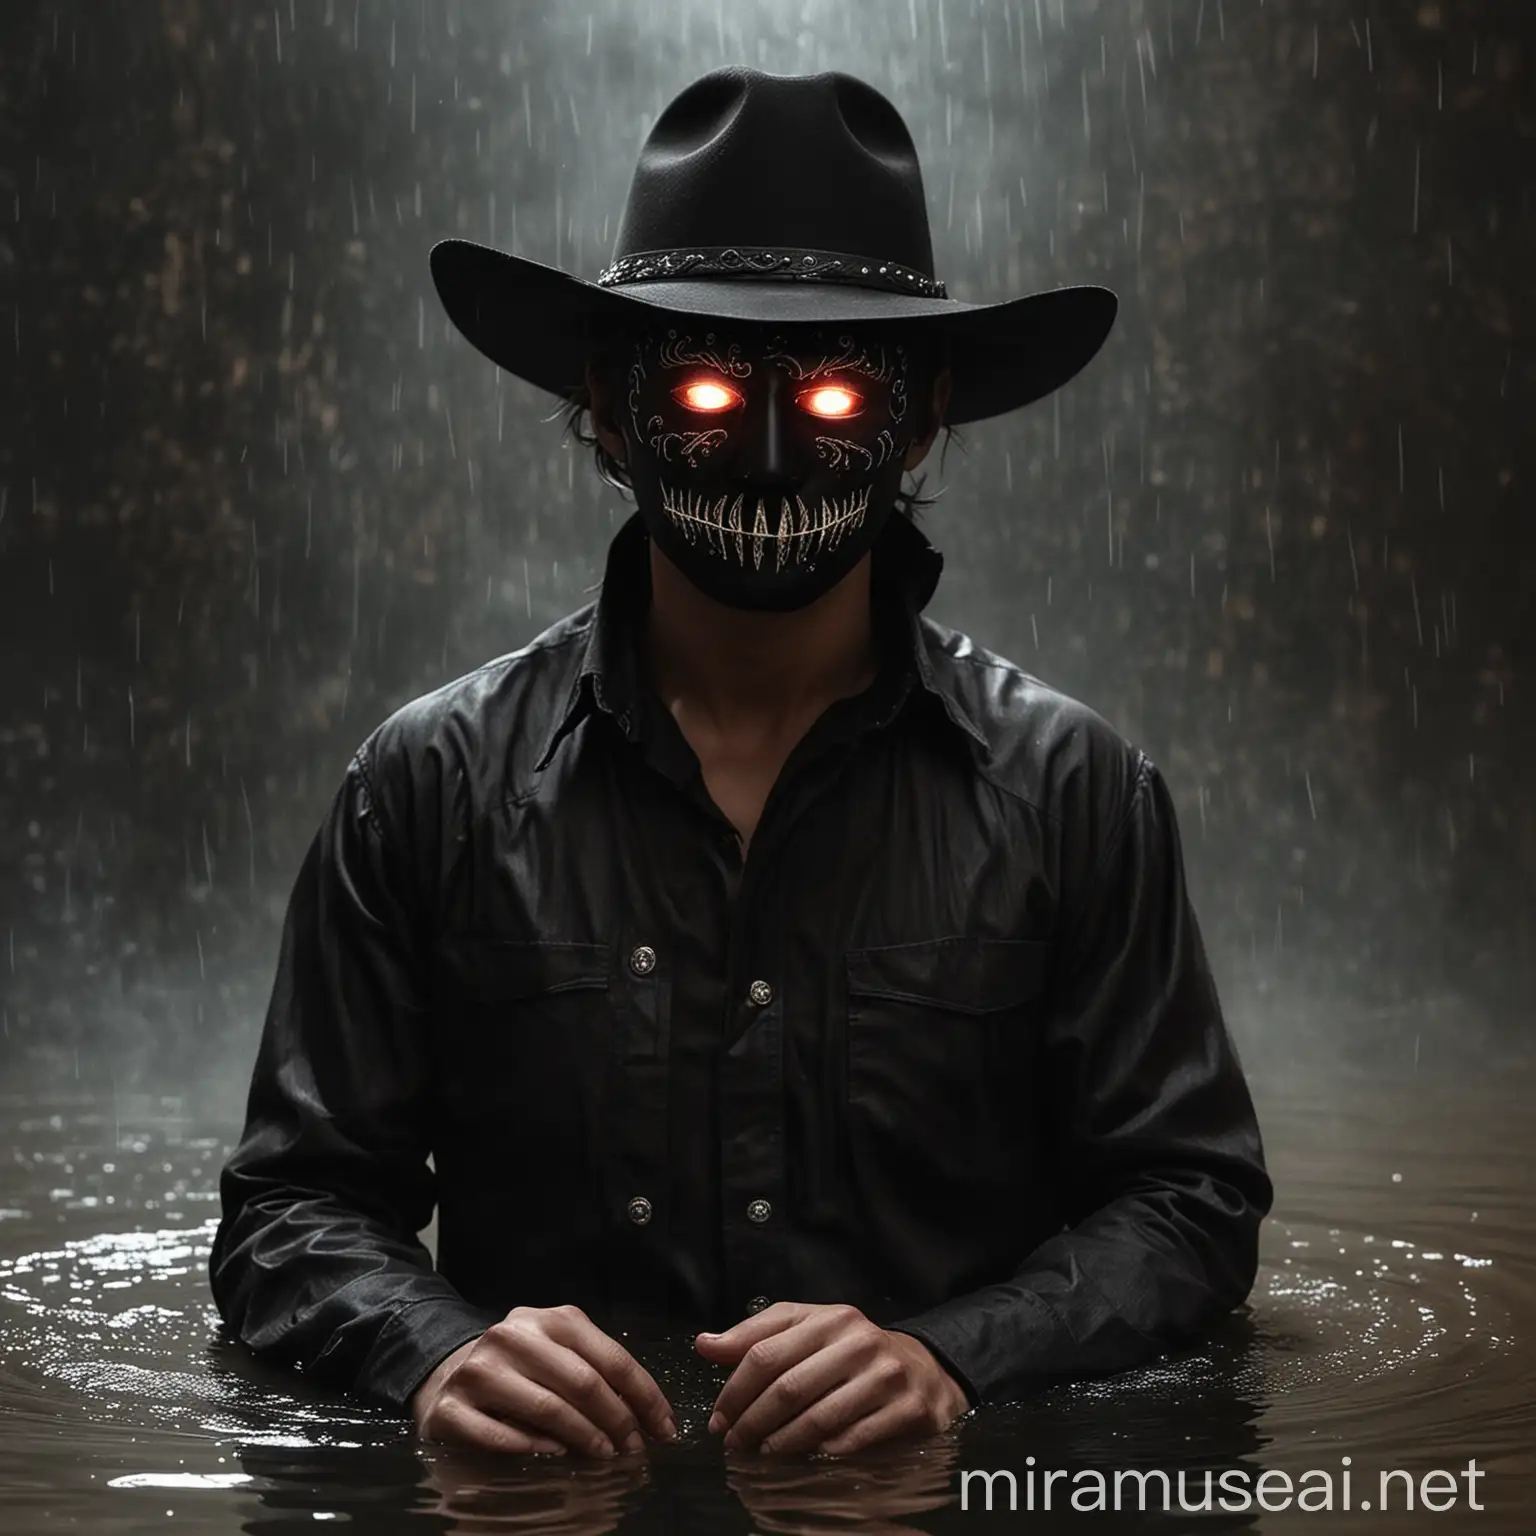 Make the guy wear a blck cowboy hat and black mask. With glowing white eyes and a black and brown outfit. make the water red